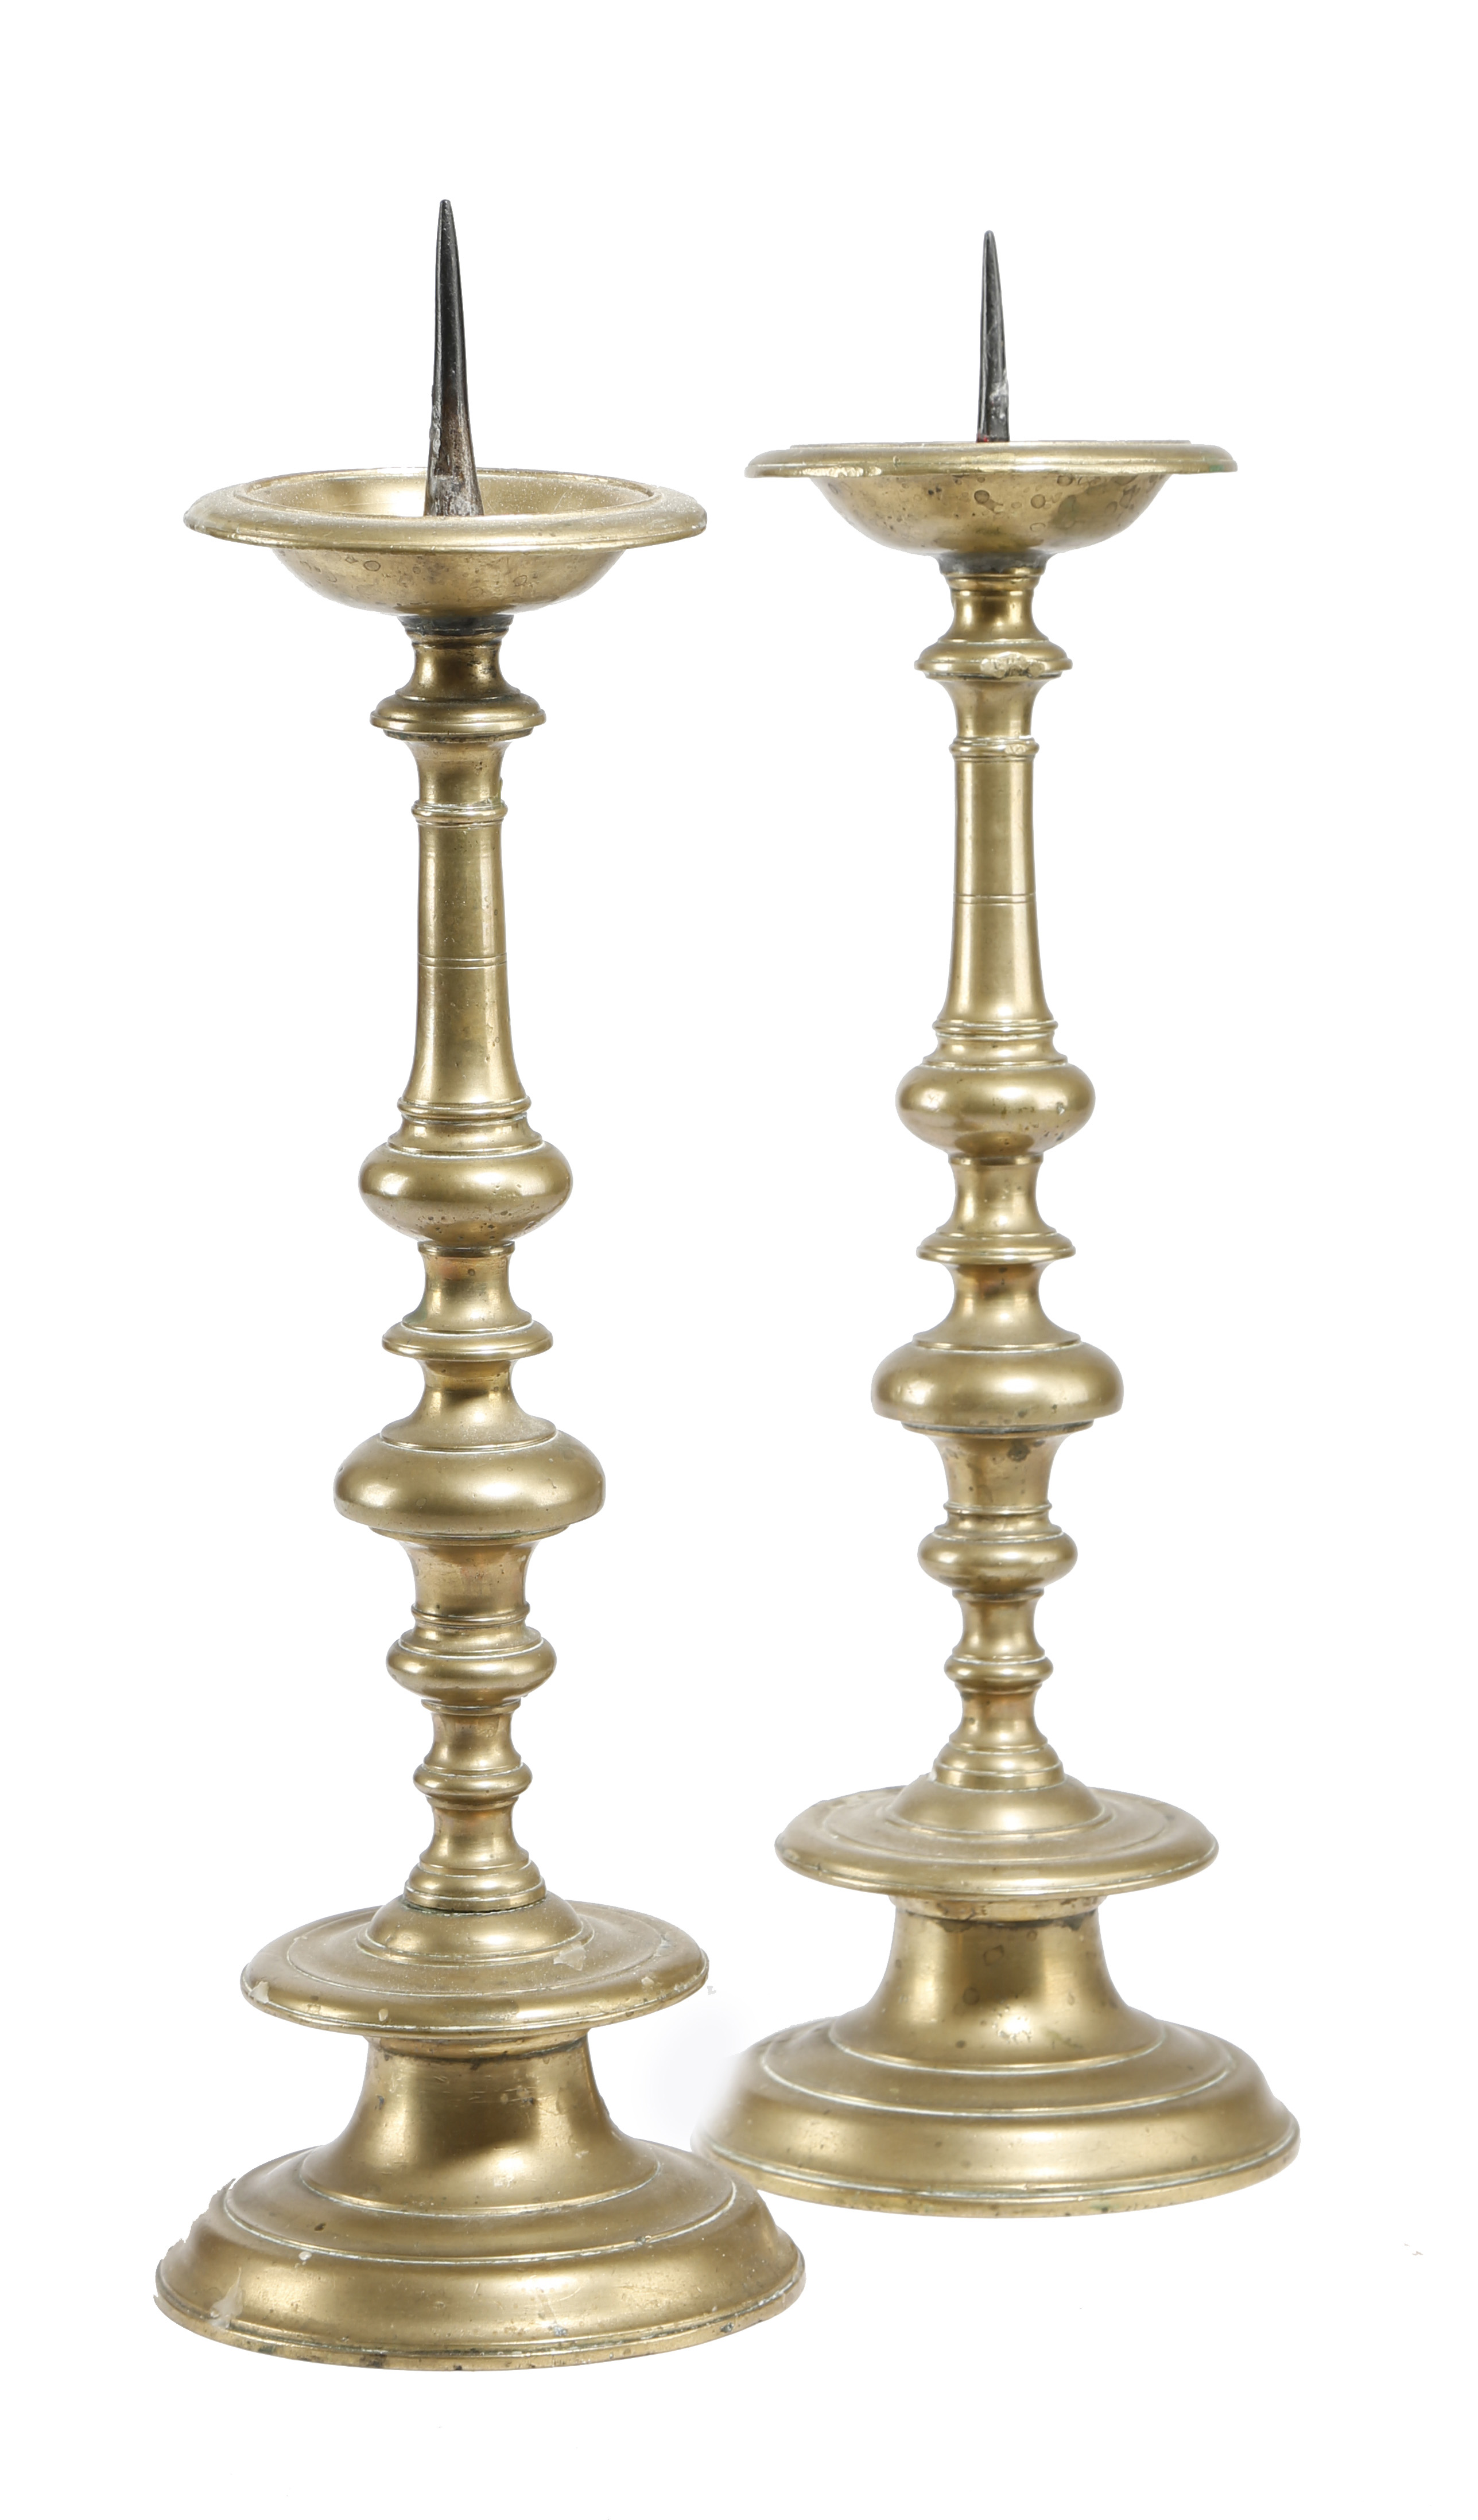 A PAIR OF FLEMISH BRASS PRICKET CANDLESTICKS LATE 17TH / EARLY 18TH CENTURY each with a dished